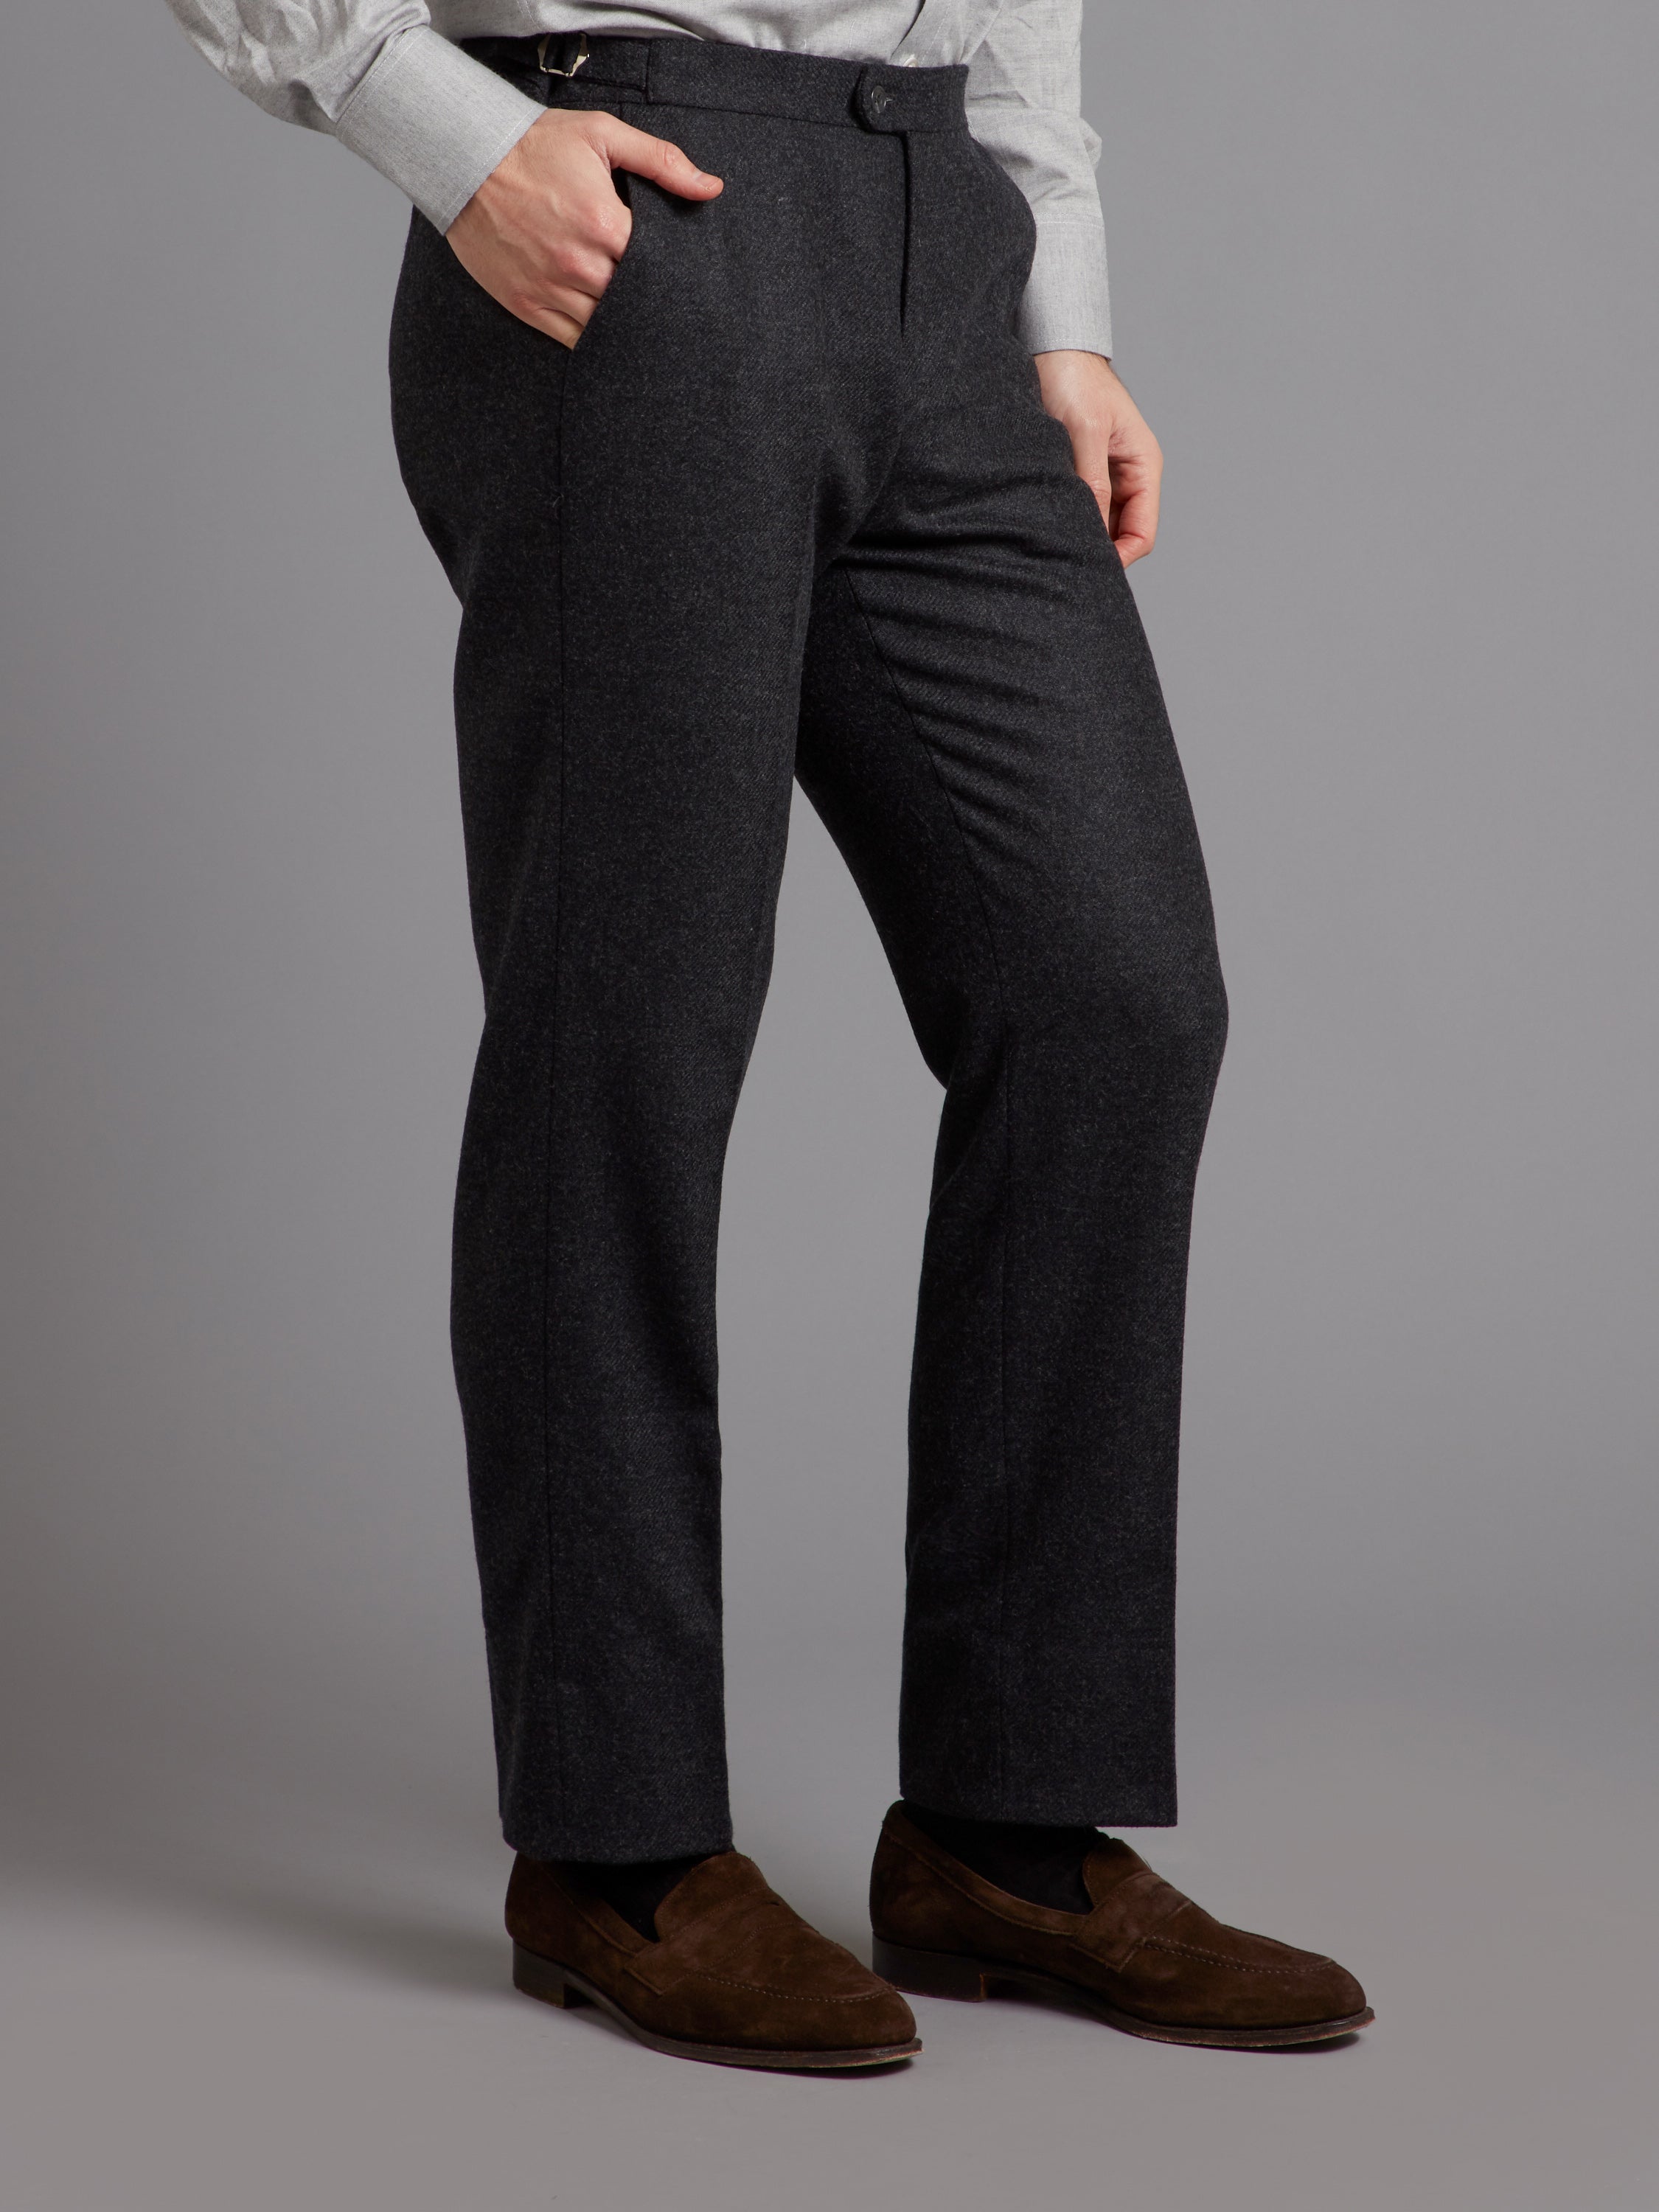 Light Grey Stretch Wool Dress Pant - Custom Fit Tailored Clothing